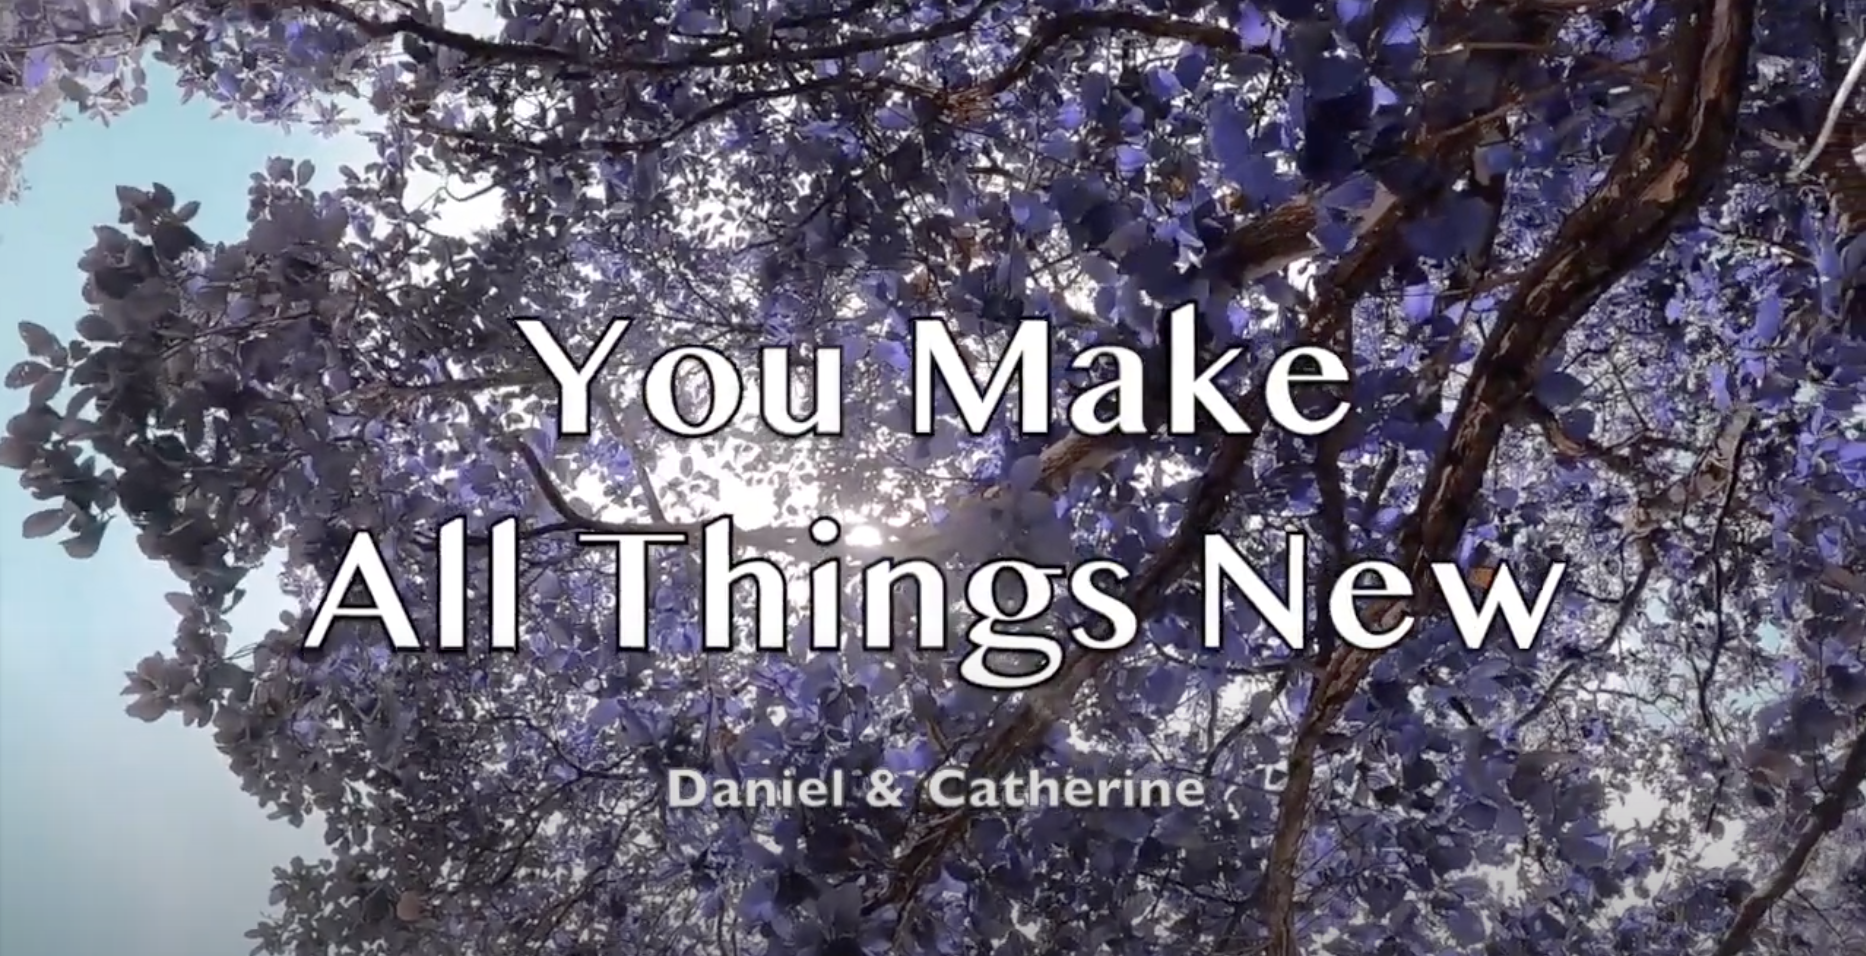 You Make all things new